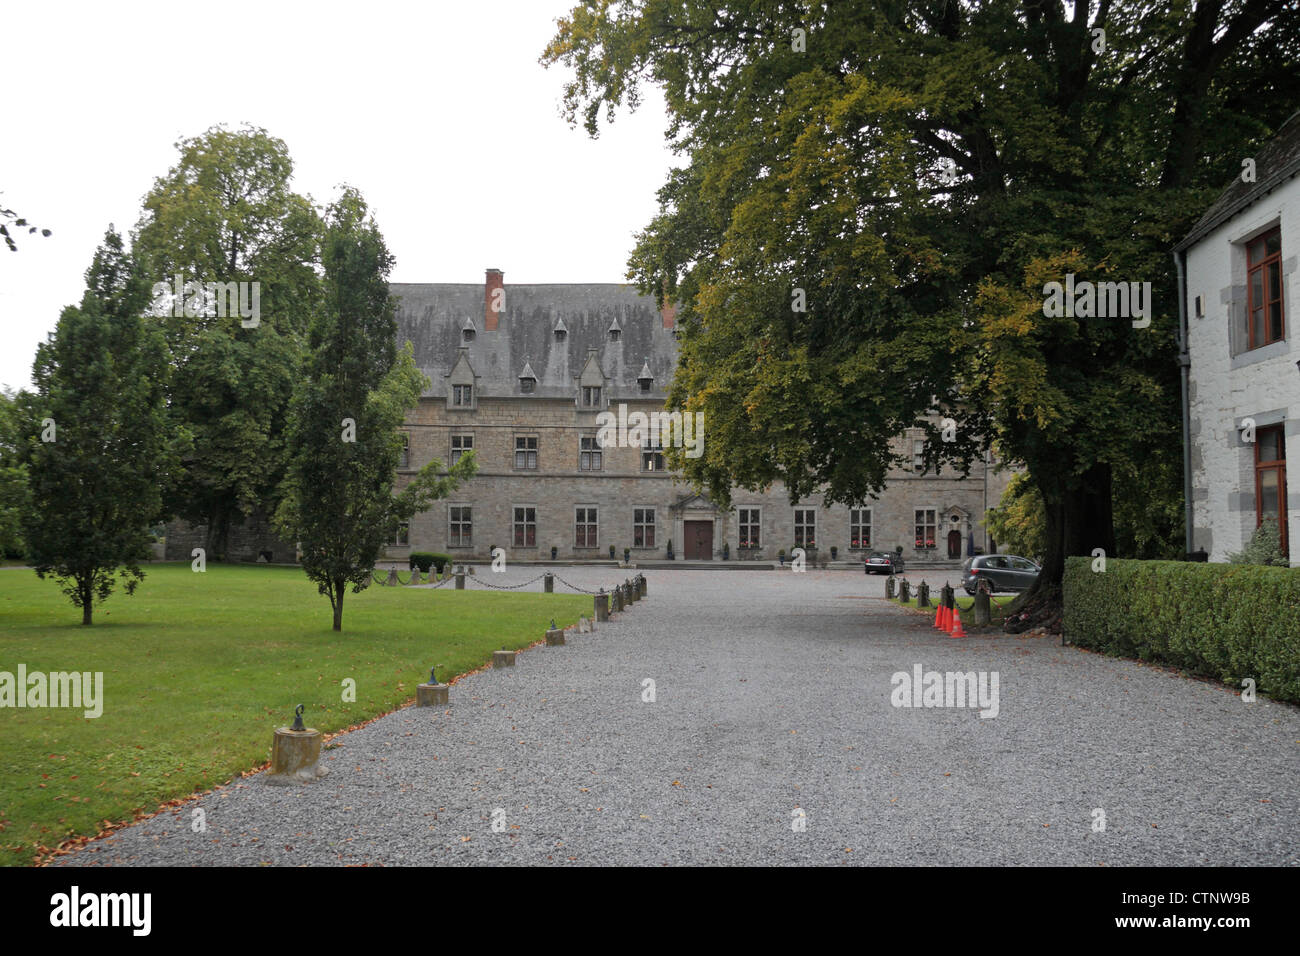 The Chateau des Princes de Chimay, in Chimay, Wallonia, Belgium. Stock Photo